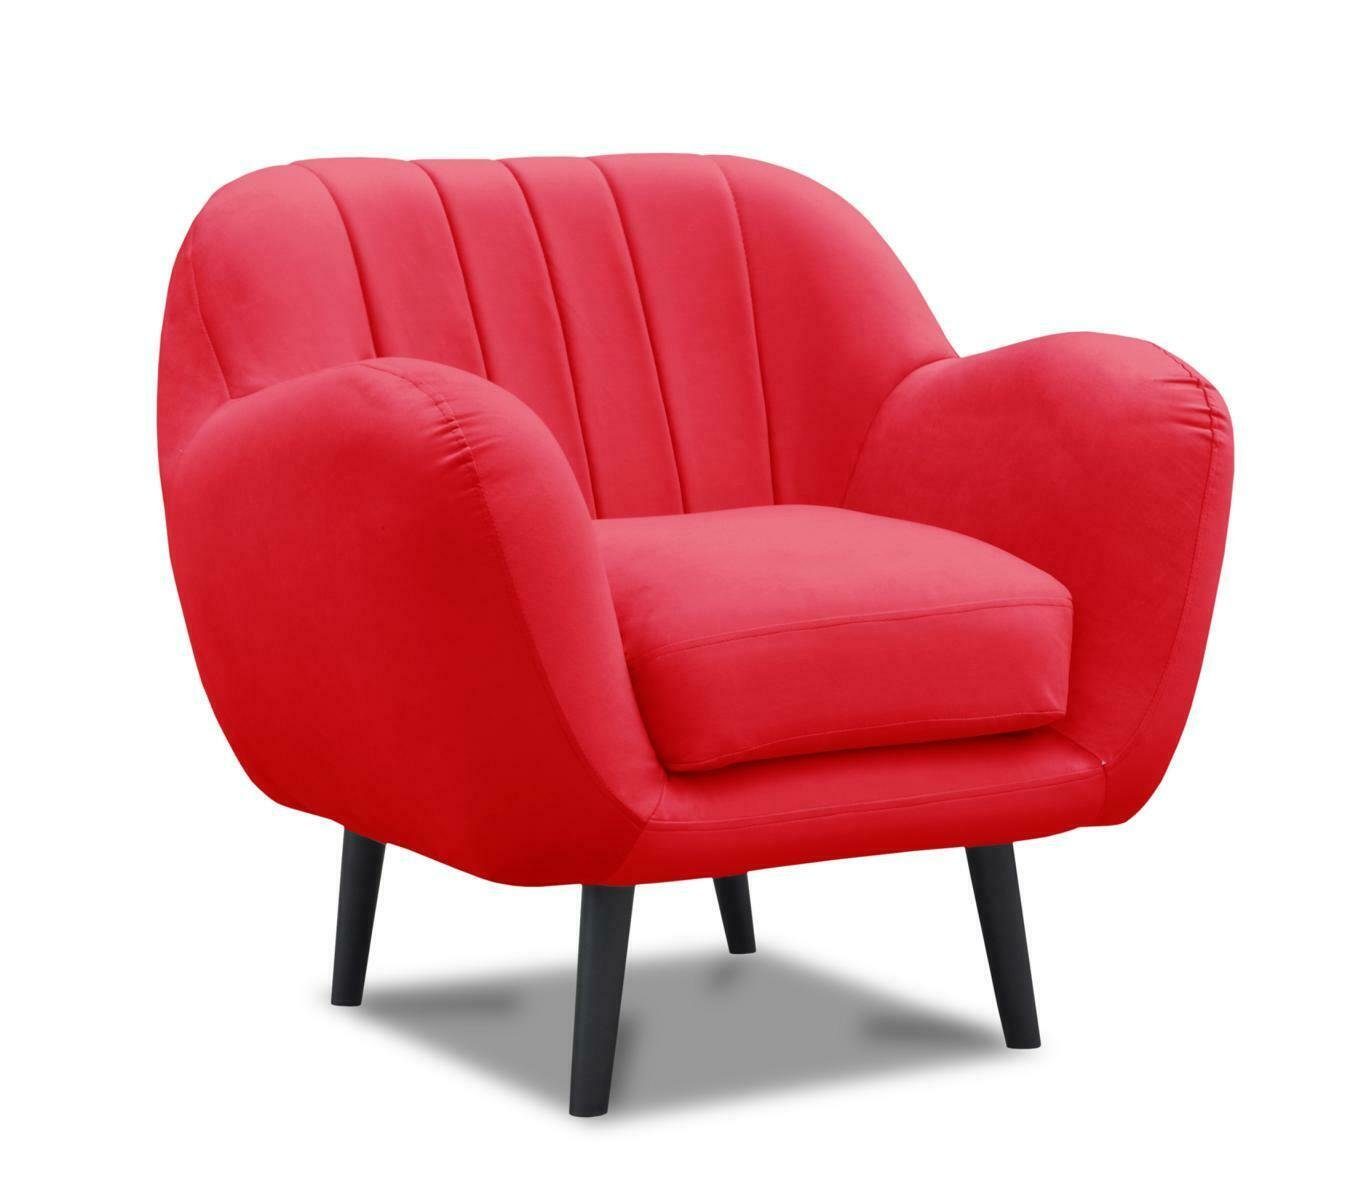 Sofa Sessel Sessel, Luxus Lounge Club Sitzer Polster Design Couch Relax JVmoebel Stoff Fernseh